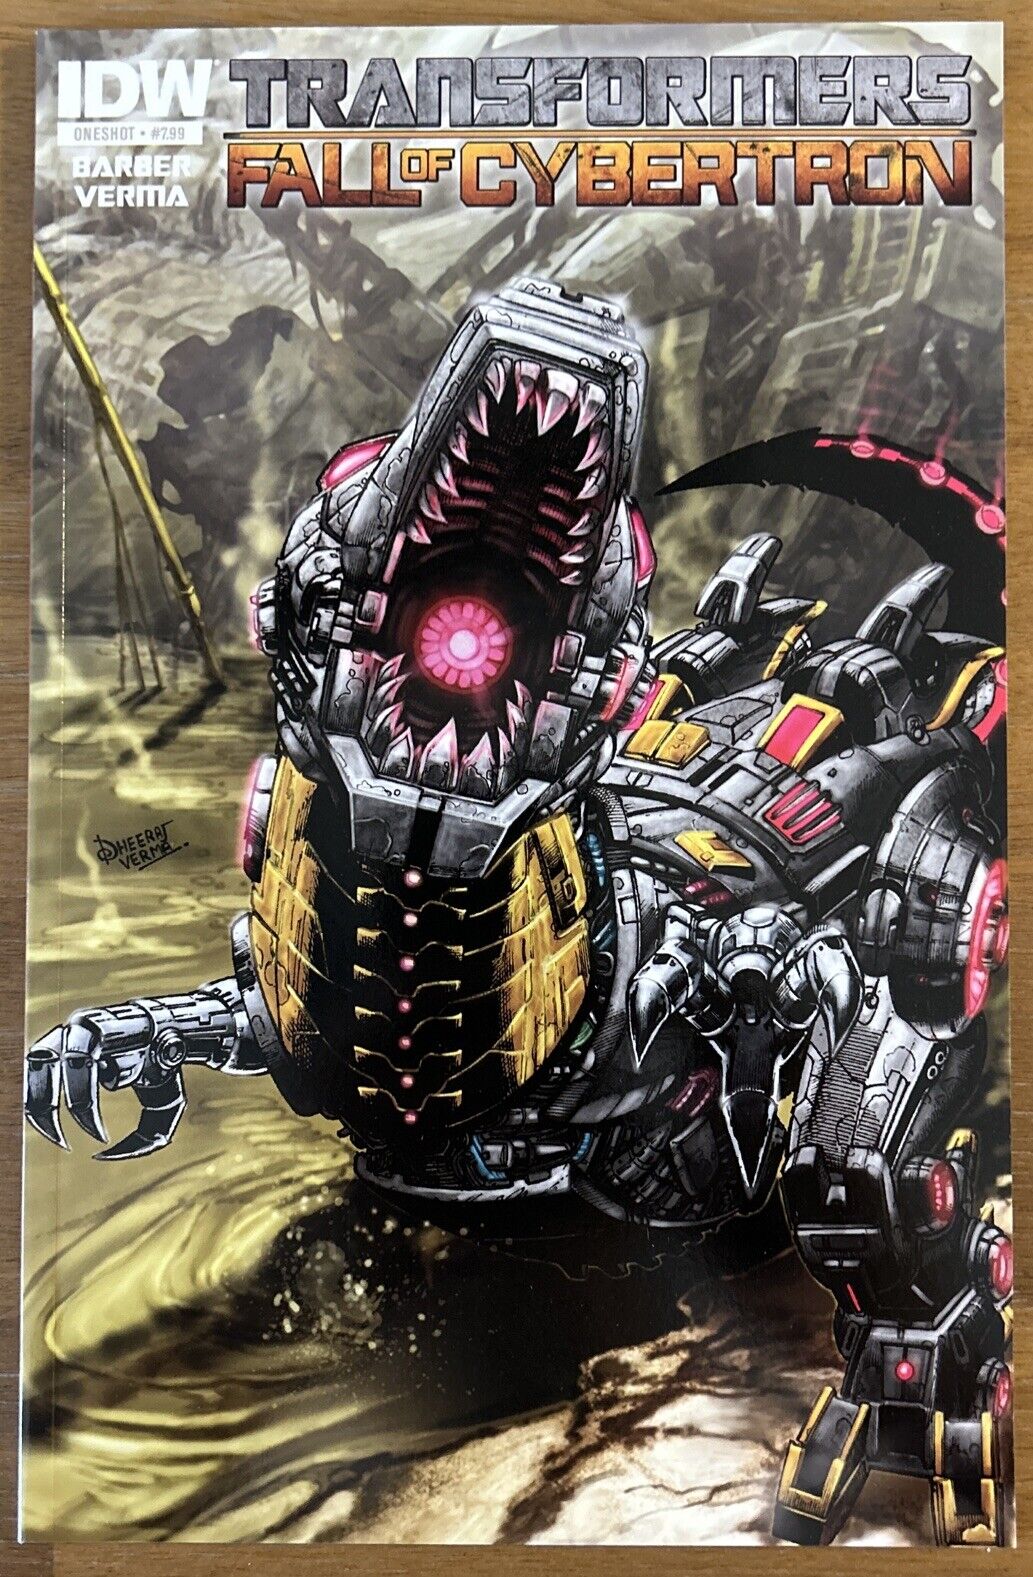 2012 IDW The Transformers Fall of Cybertron #1 One Shot Rise of the Dinobots TPB